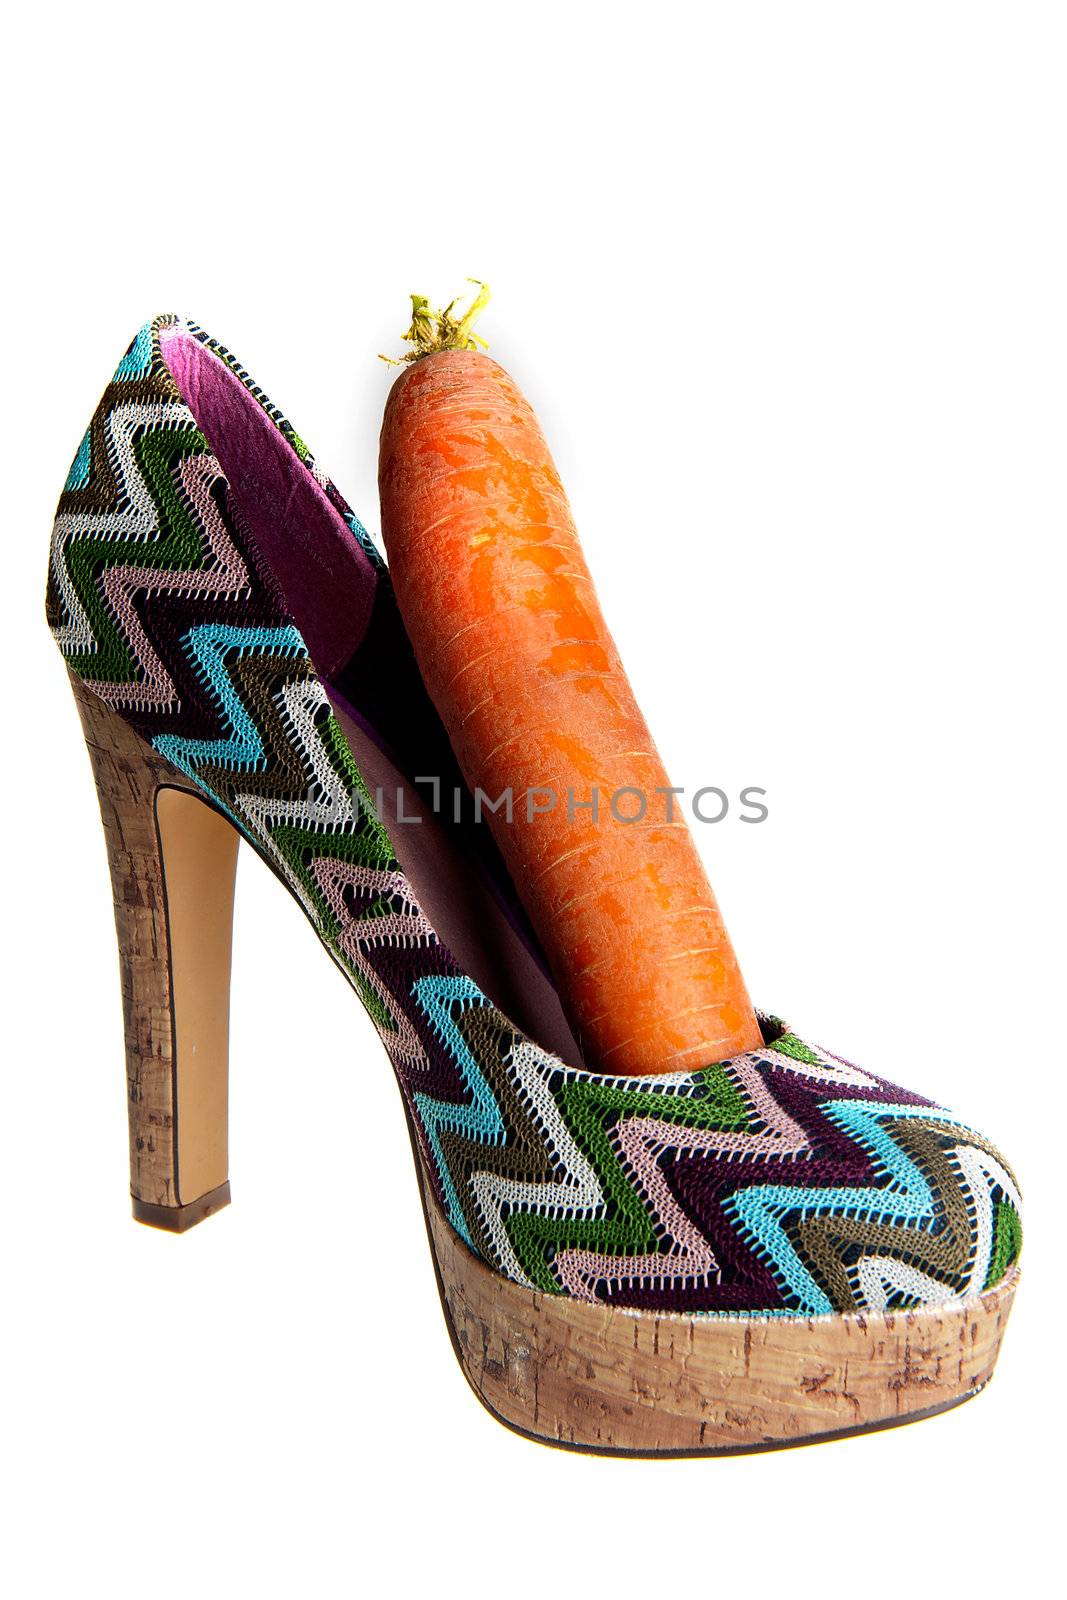 High heel shoe with a carrot, for the dutch holiday called "sinterklaas"